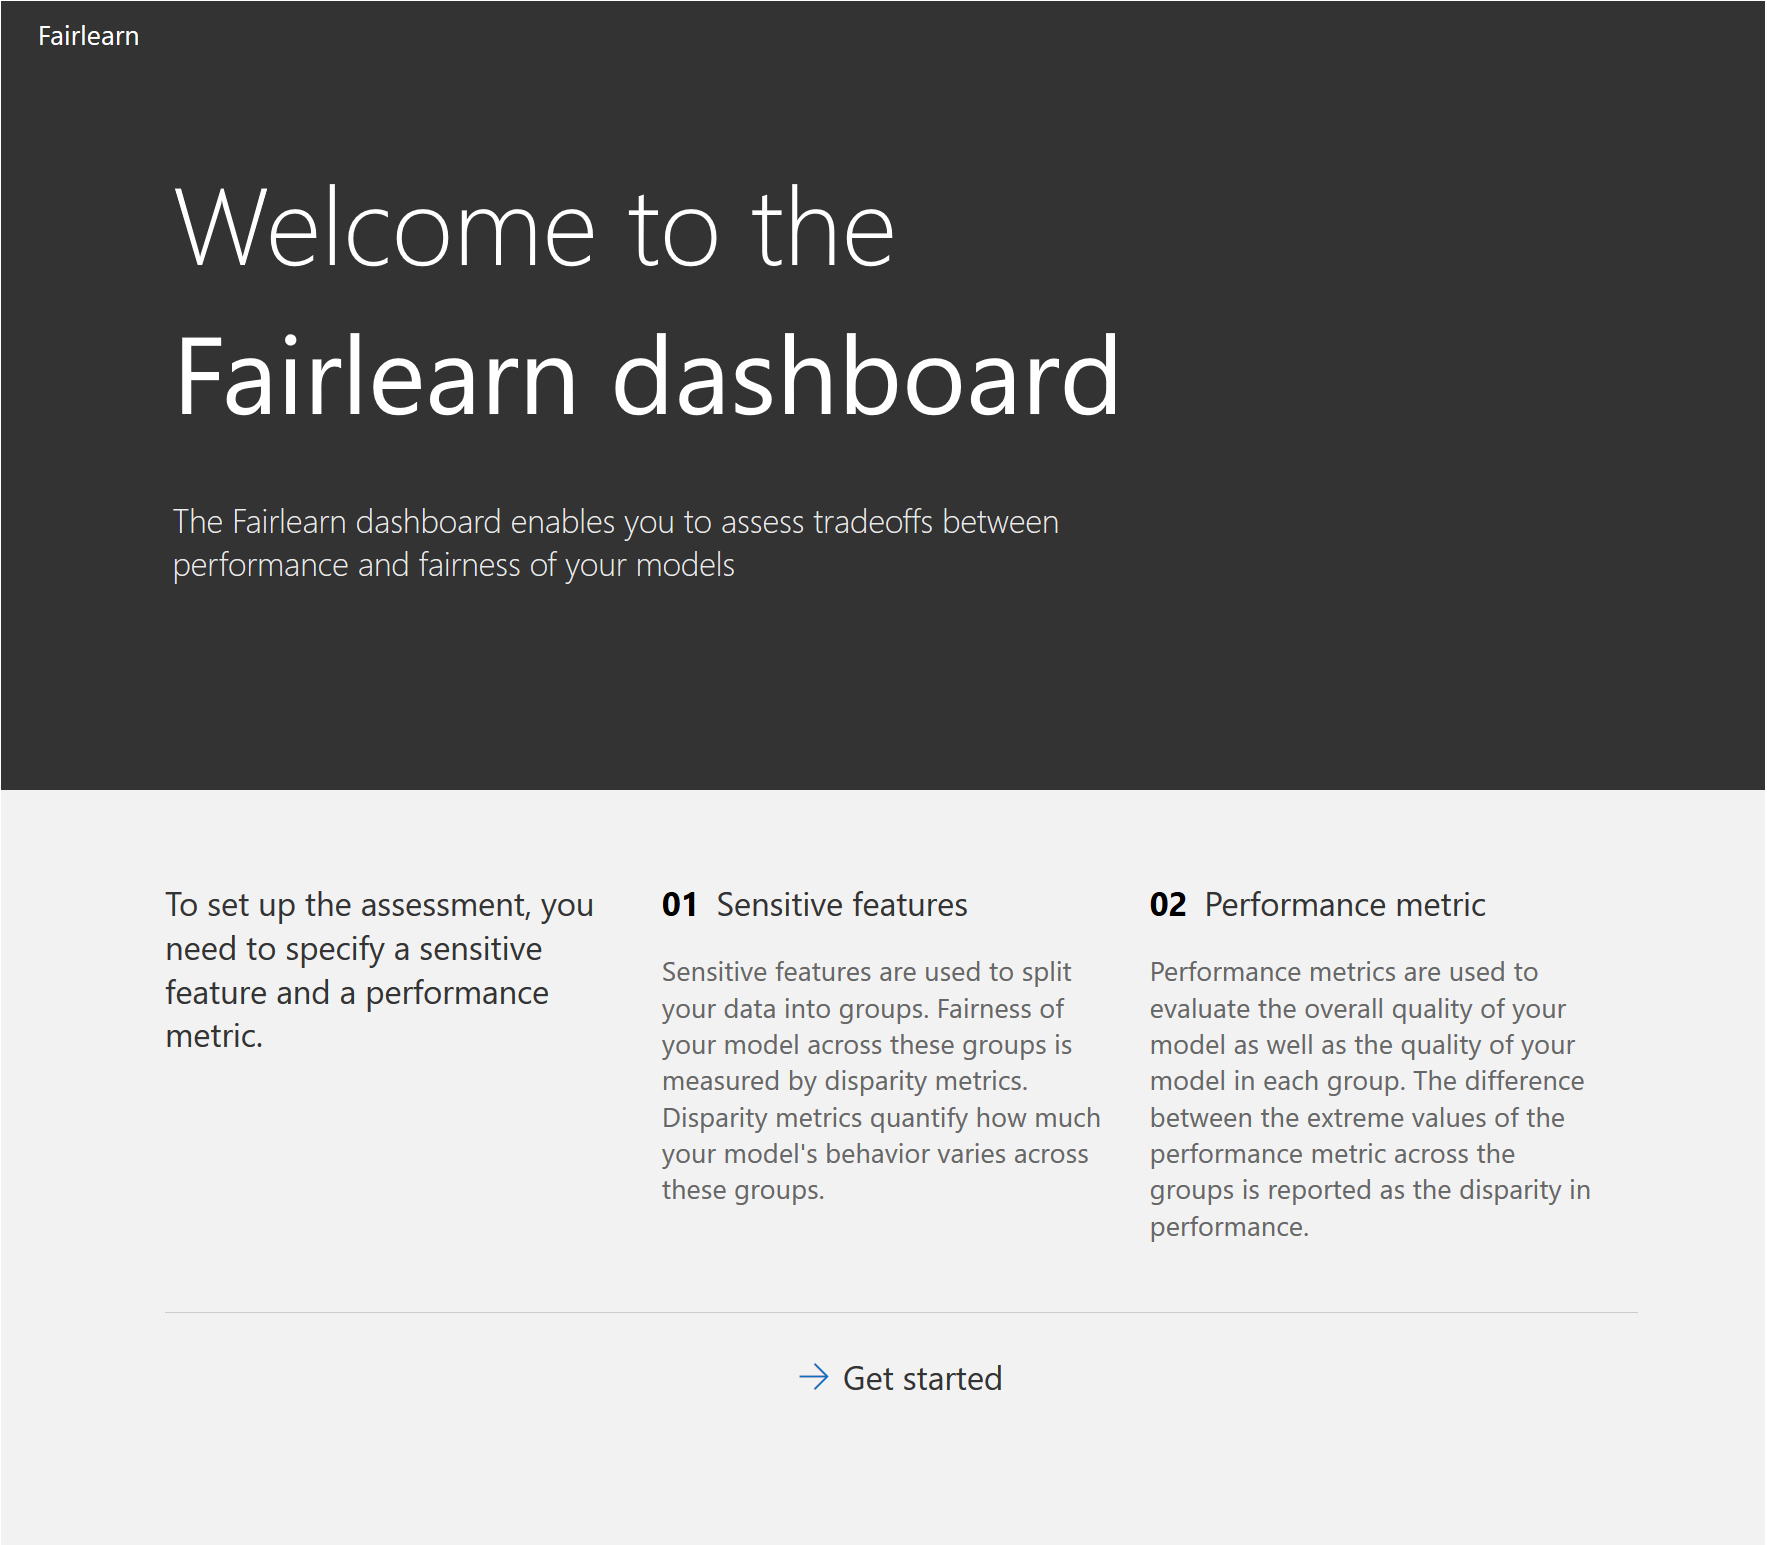 _images/fairlearn-dashboard-start.png